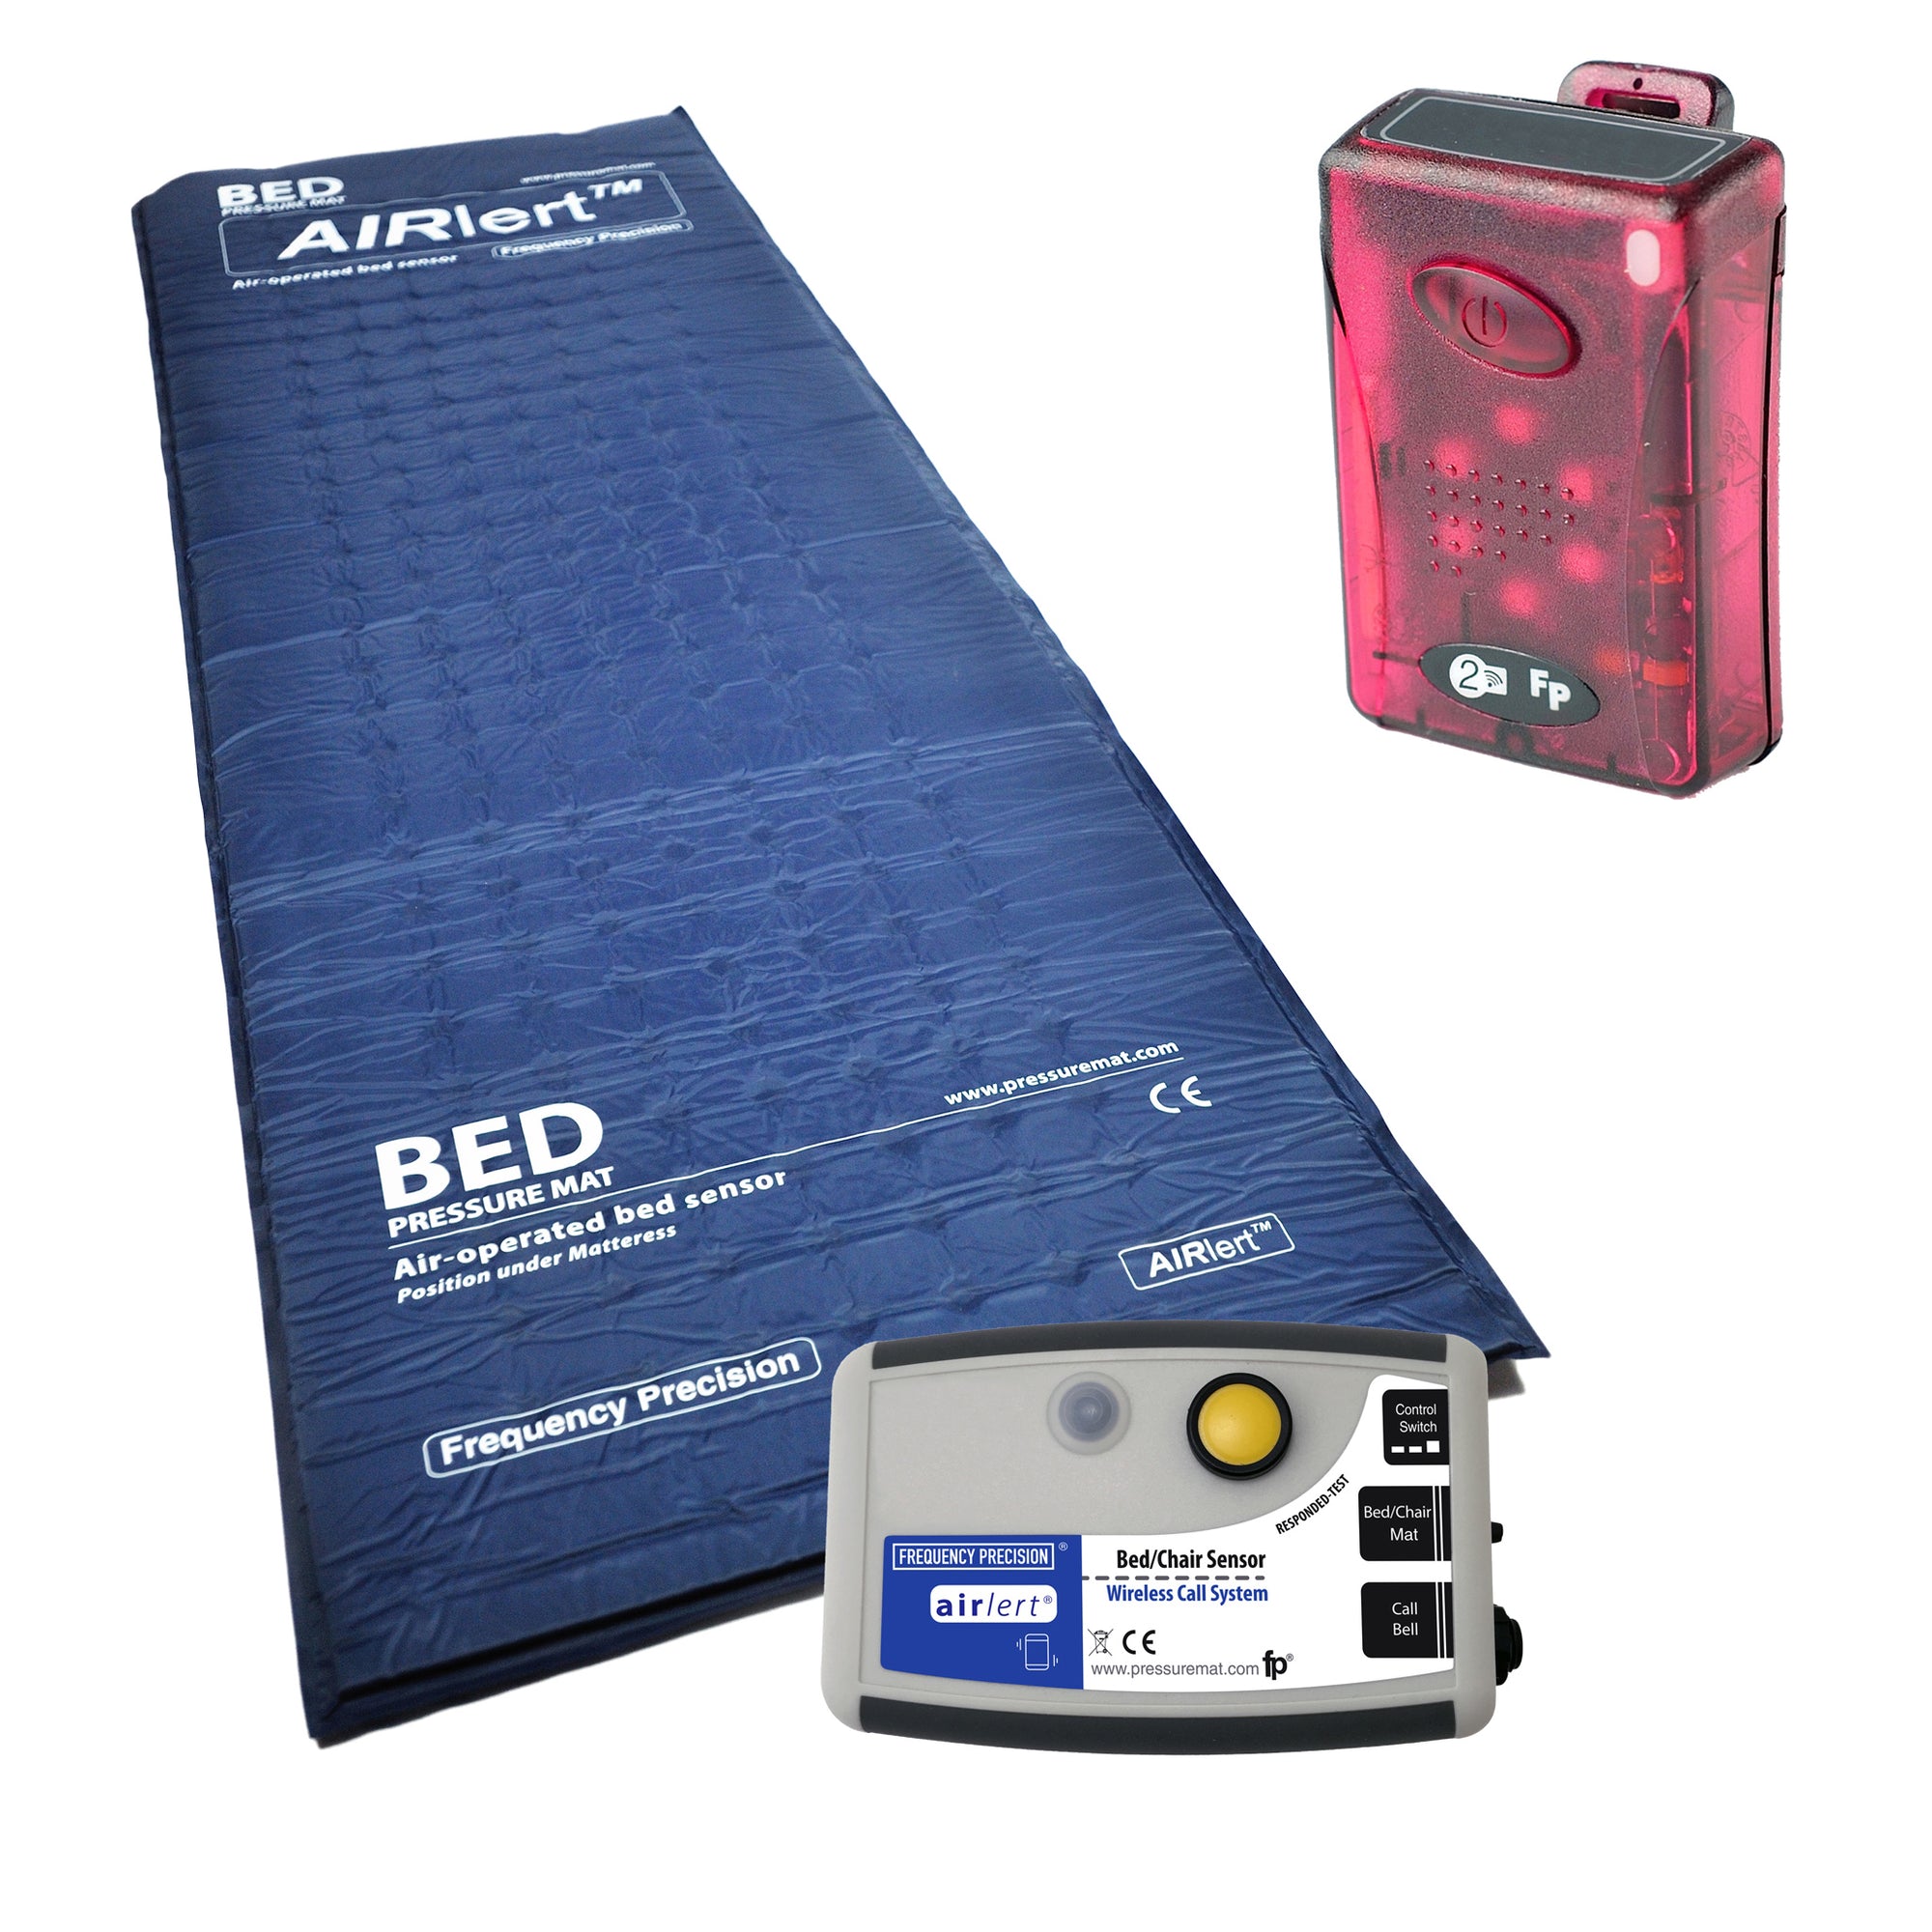 Product image displaying a Wireless Bed Pressure Mat & Pager set